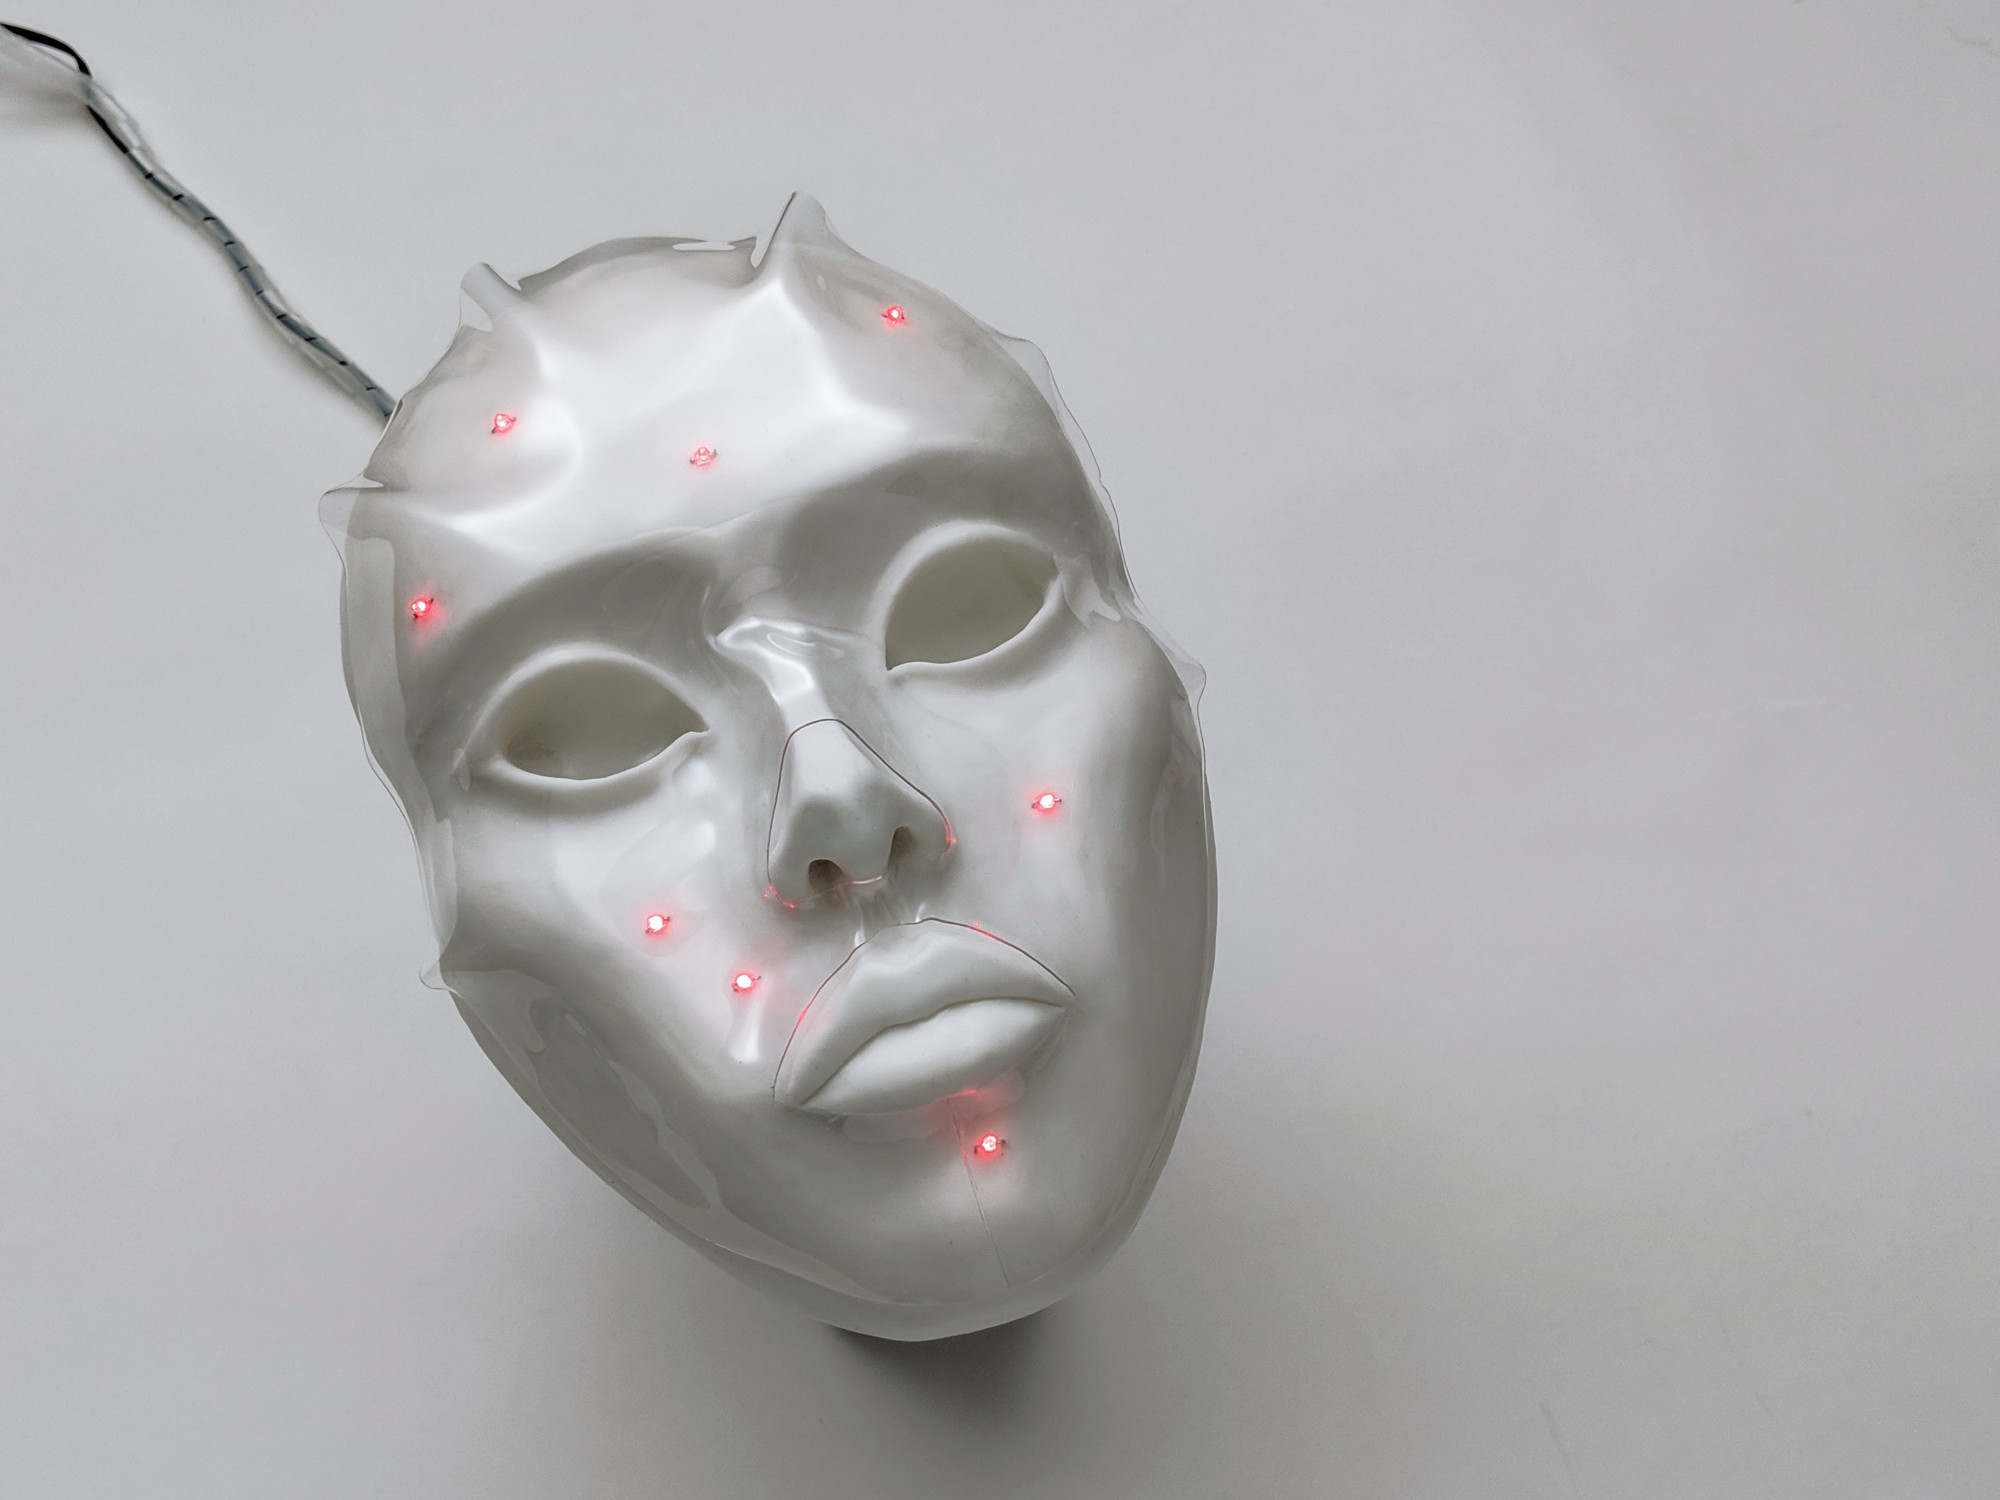 Red Pixel, 2018. Electronic mask imitating blemishes on one’s facial skin